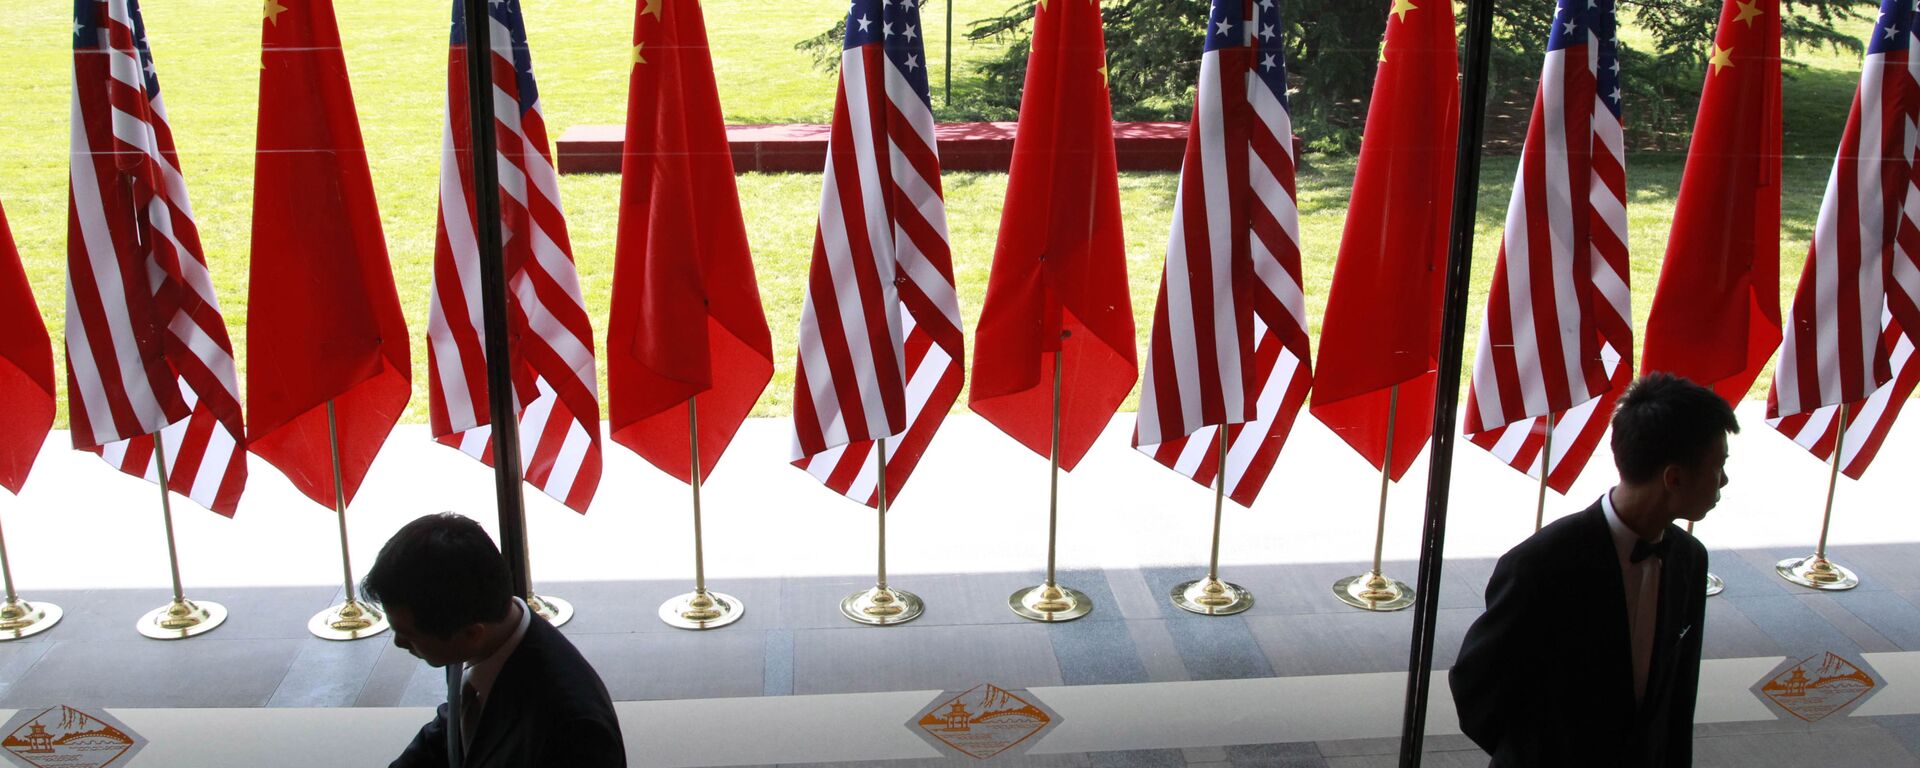 Chinese and US national flags are posted for the opening ceremony of the U.S.- China Strategic and Economic Dialogue at The Diaoyutai state guesthouse in Beijing Thursday, May 3, 2012 - Sputnik International, 1920, 30.10.2020